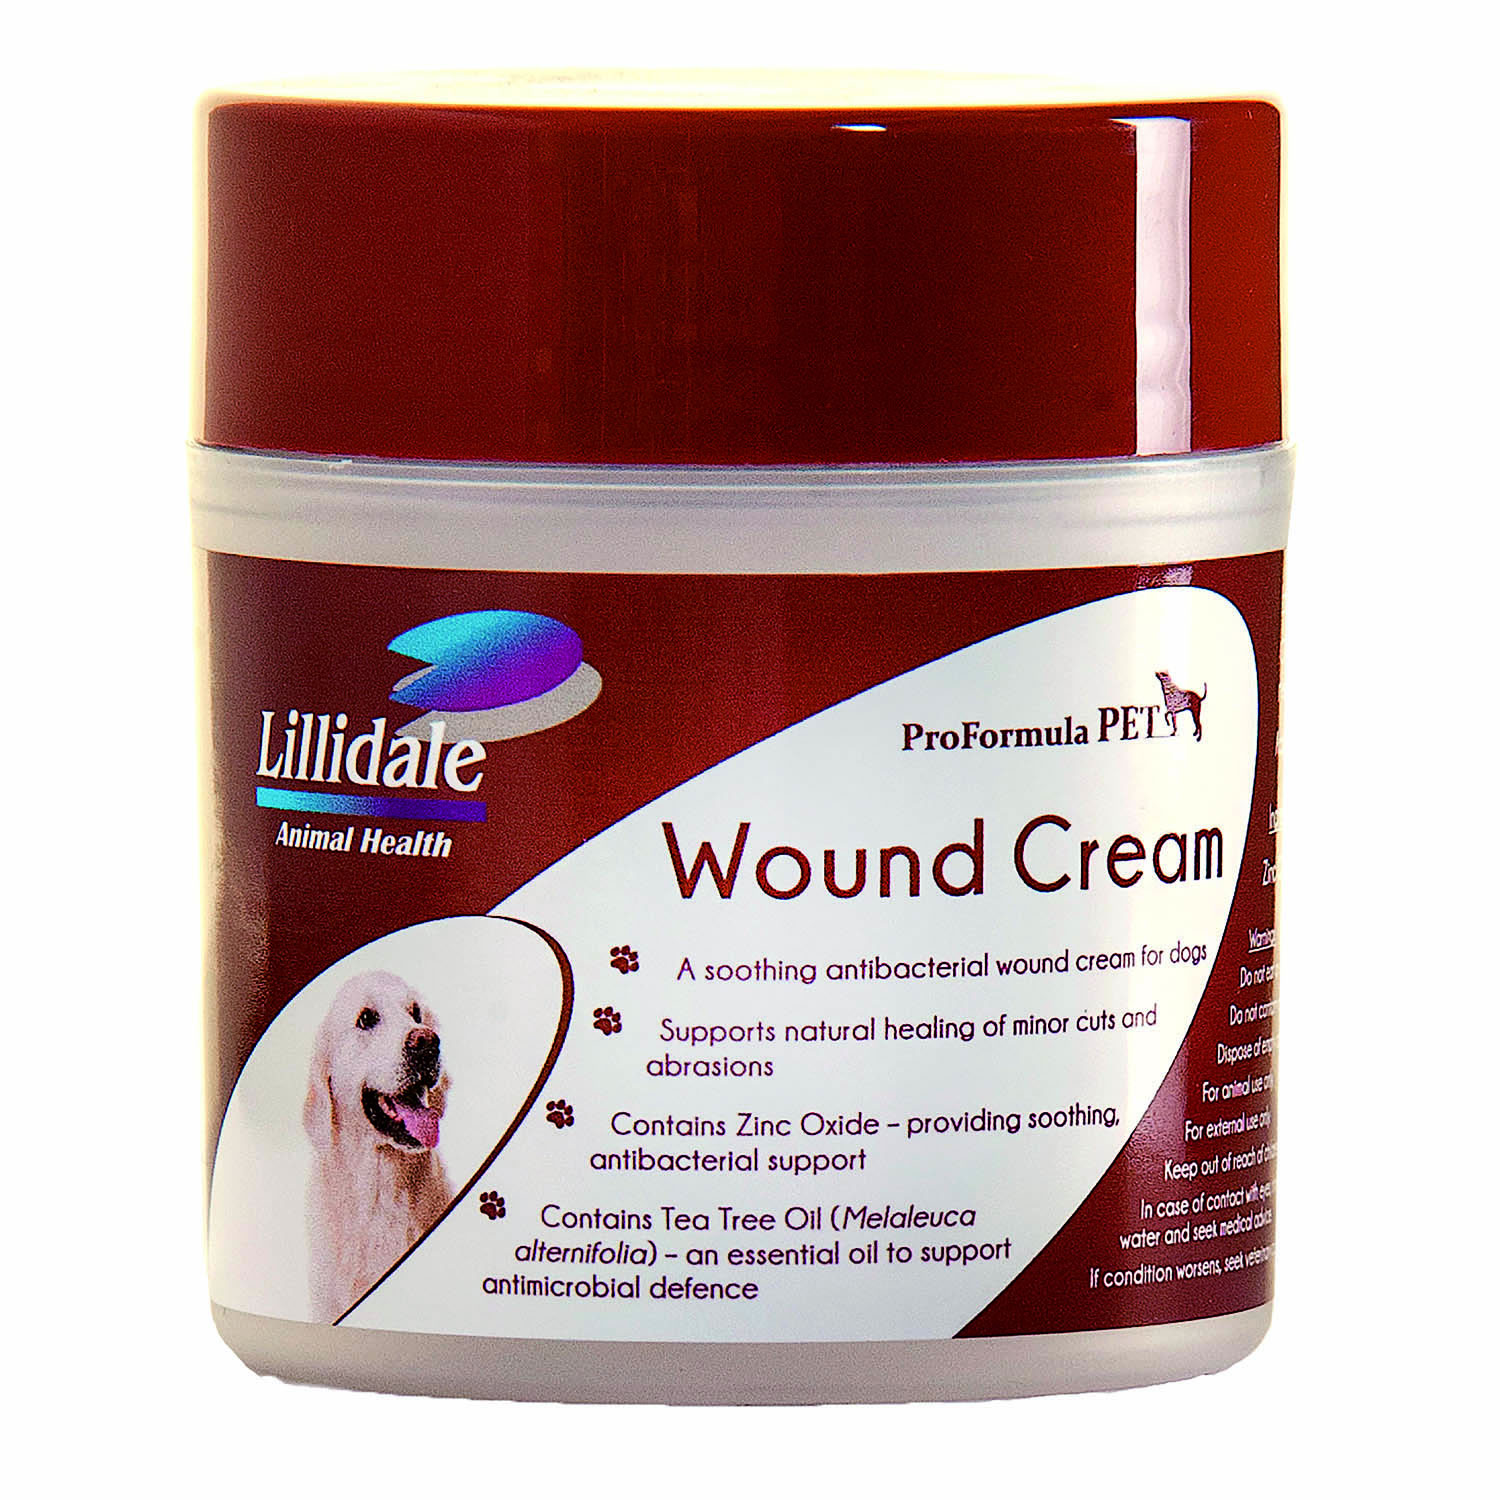 LILLIDALE WOUND CREAM 4 DOGS 100 GM 100 GM